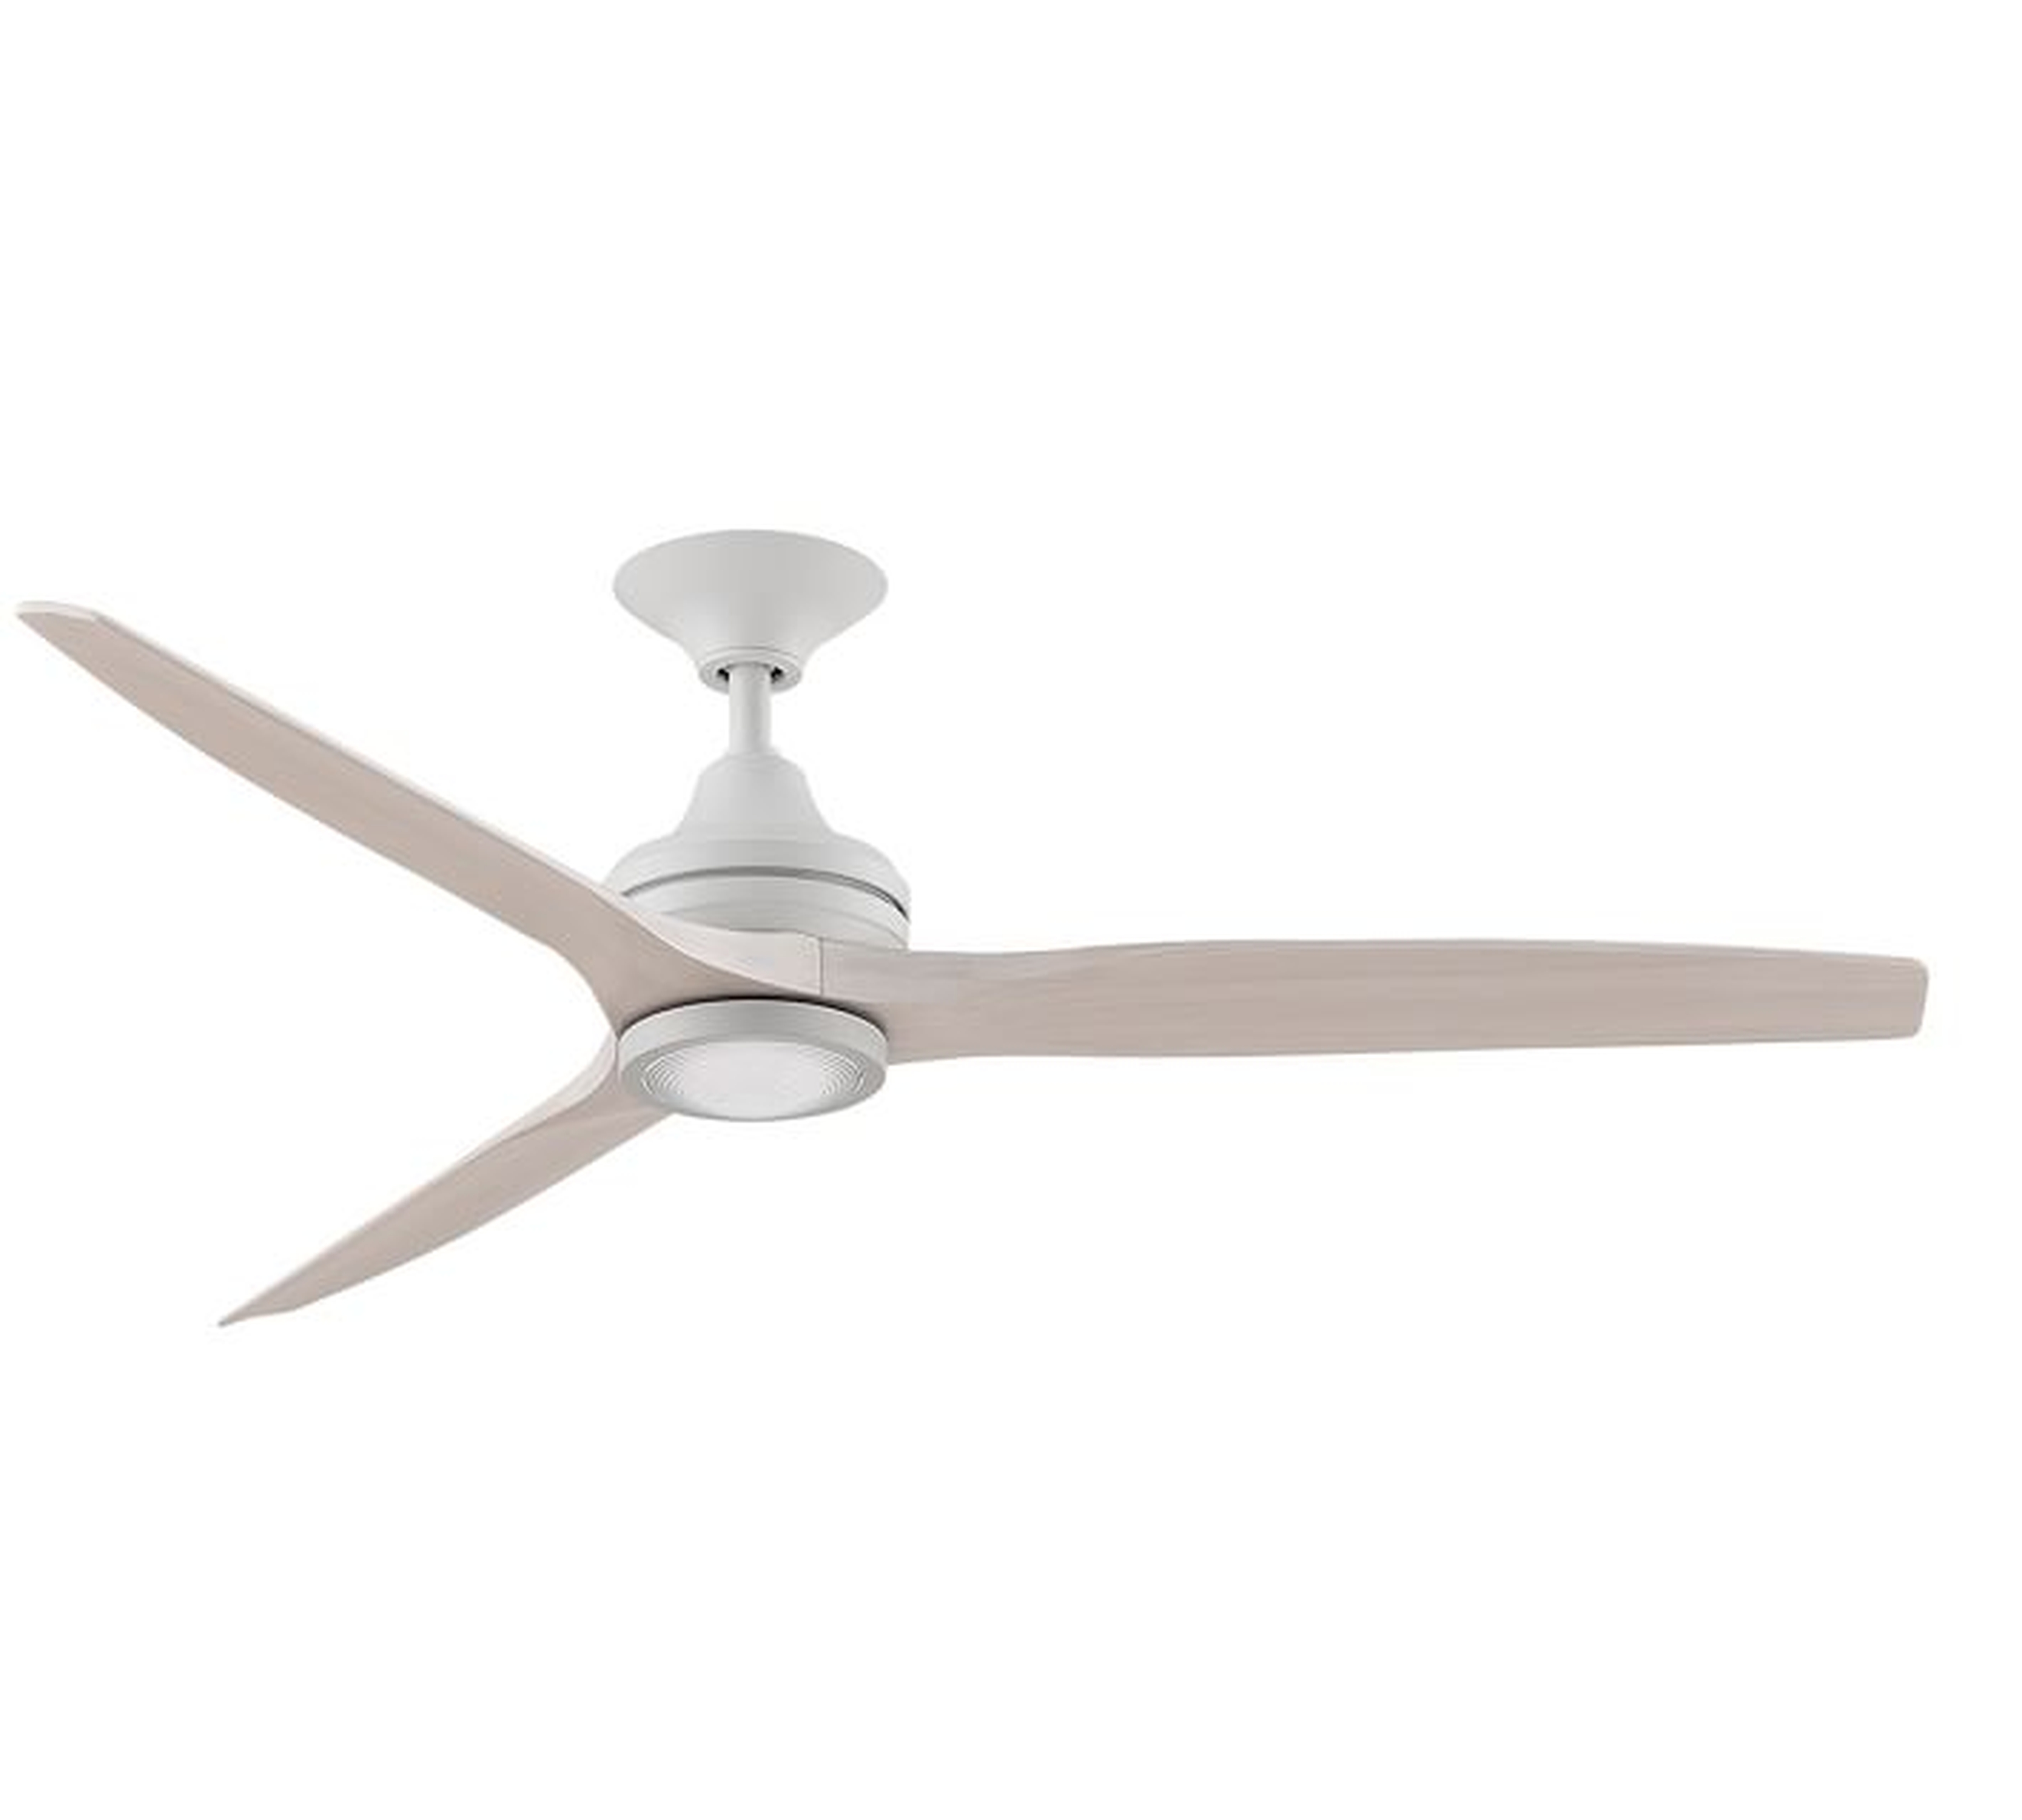 60" Spitfire Indoor/Outdoor Ceiling Fan With LED Kit, Matte White Motor With White Washed Blades - Pottery Barn